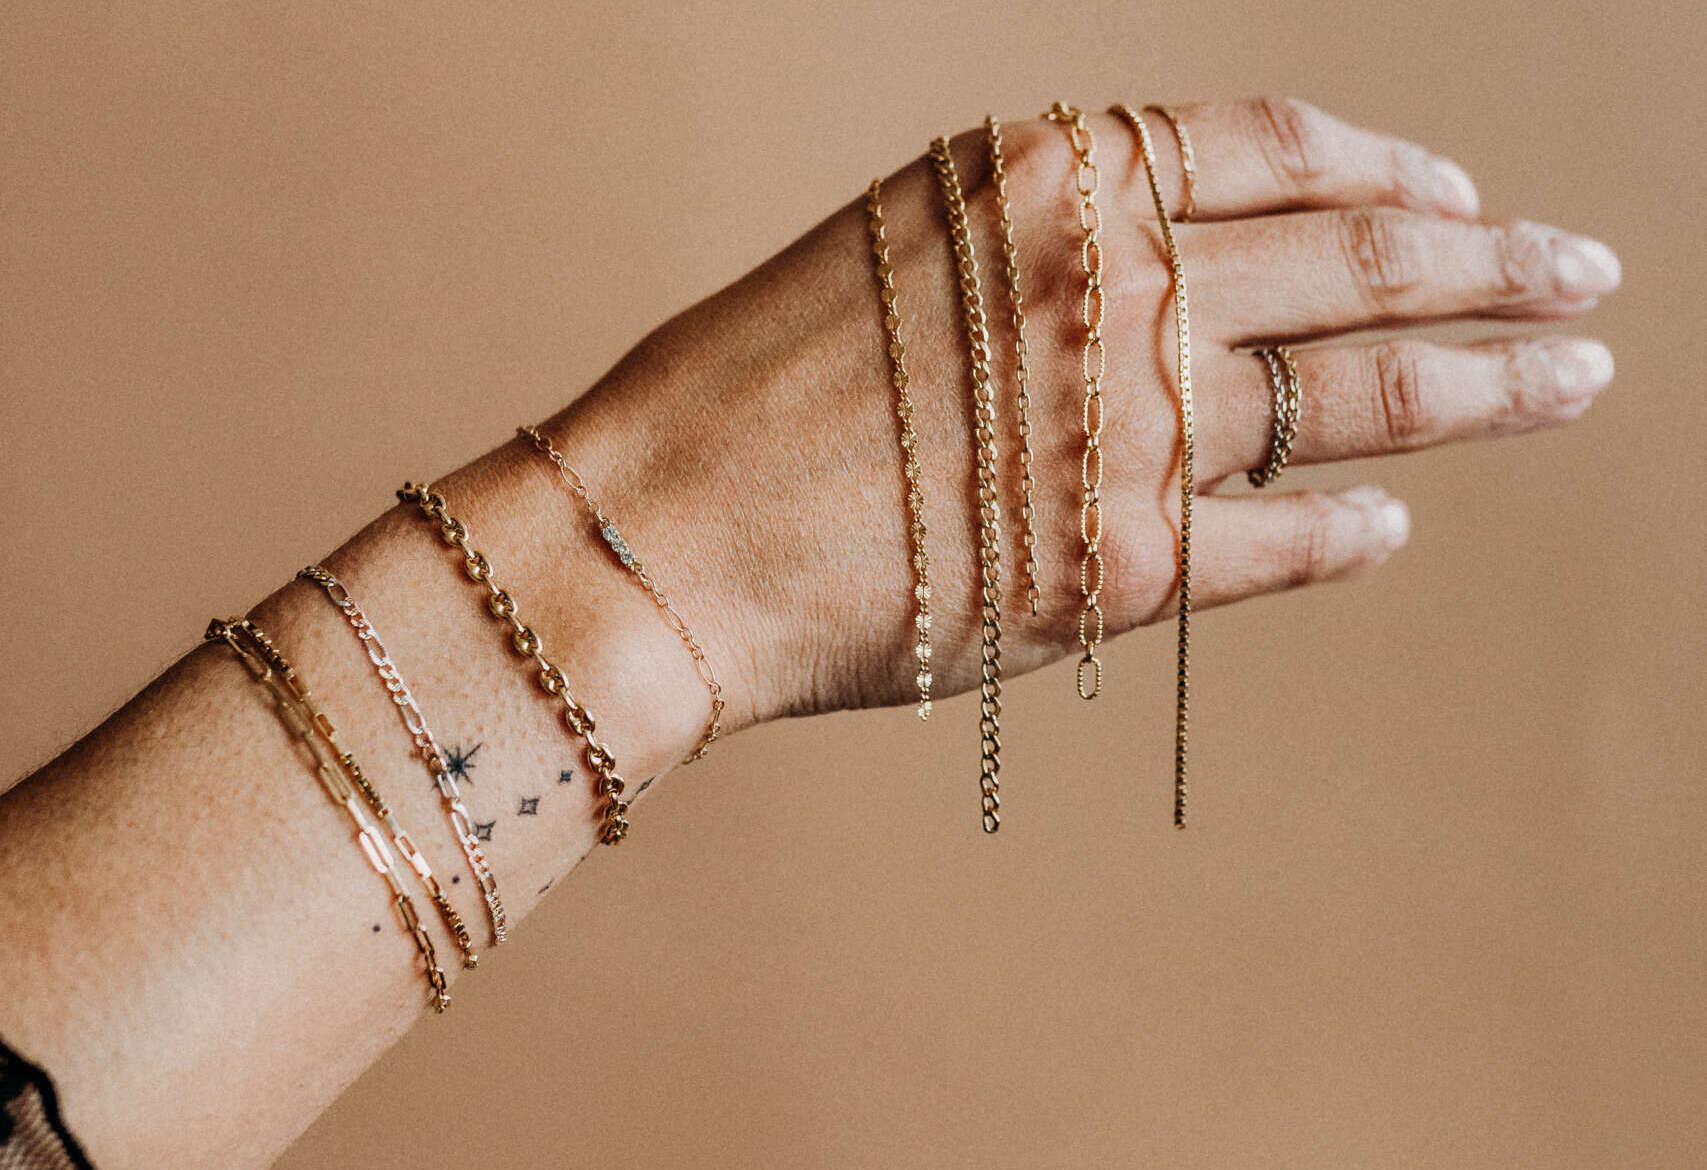 Arm Vibes in Asbury Park finds the perfect bracelet for you